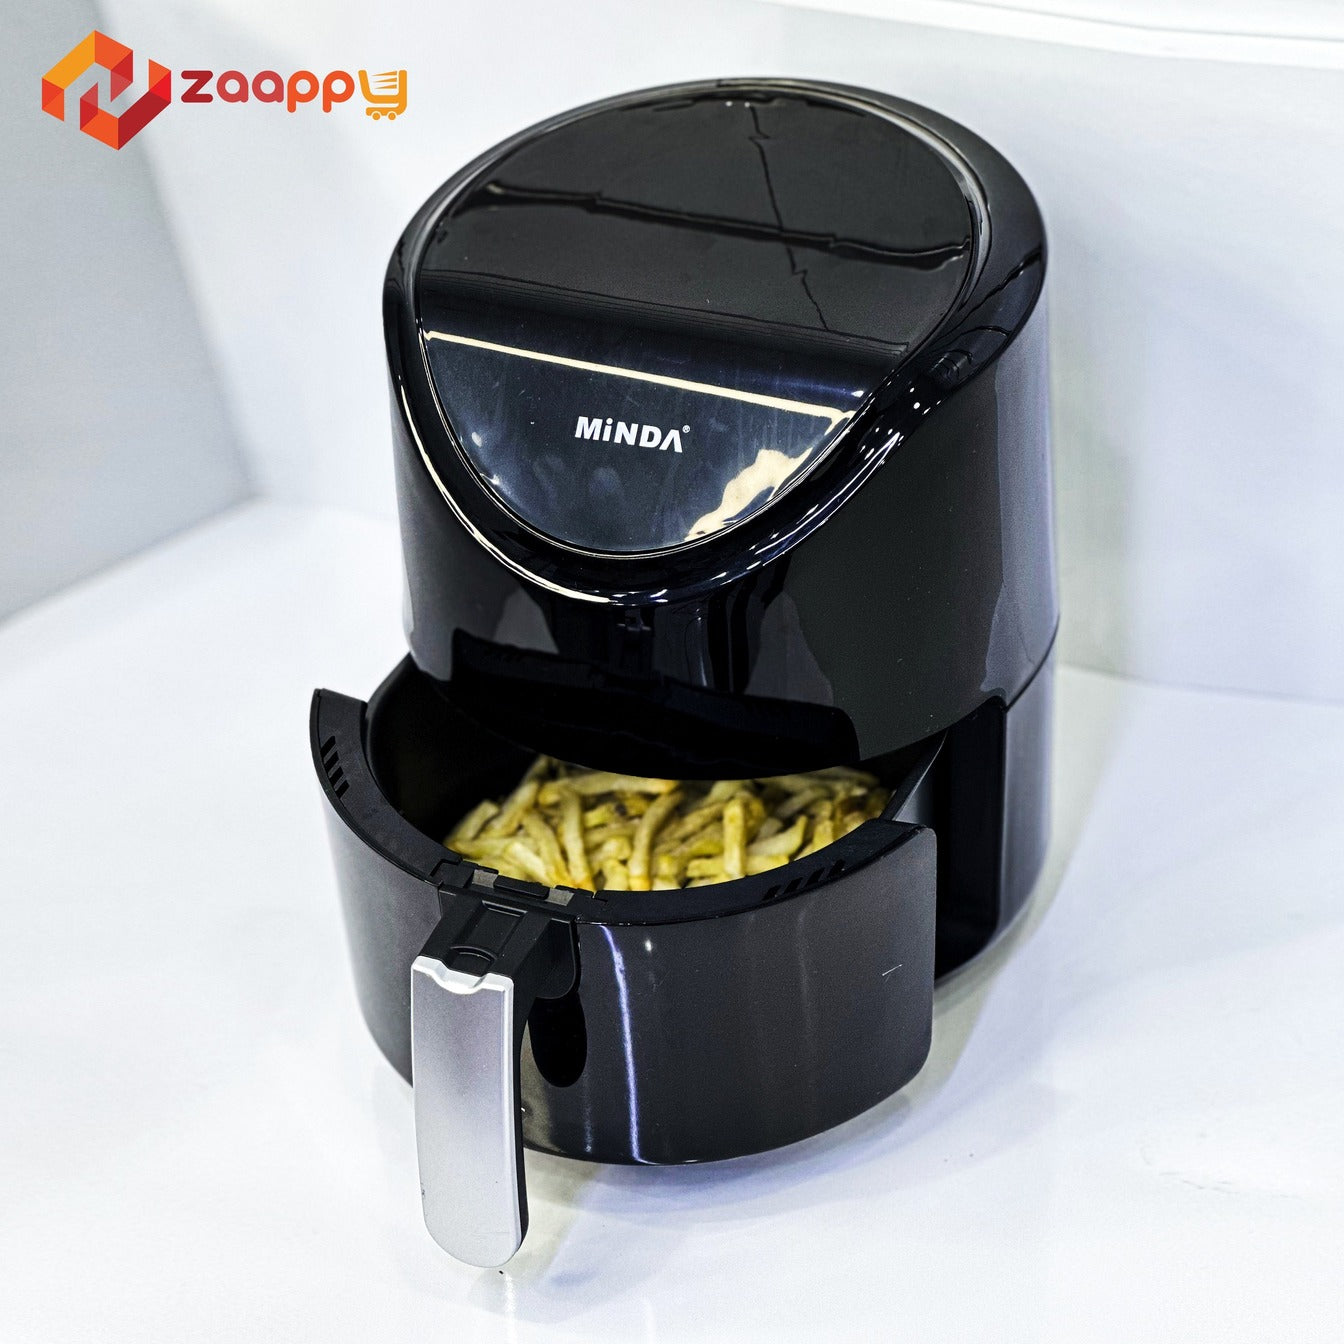 Mini Electric Air Fryer for Oil Free Low Fat Cooking Zaappy.com